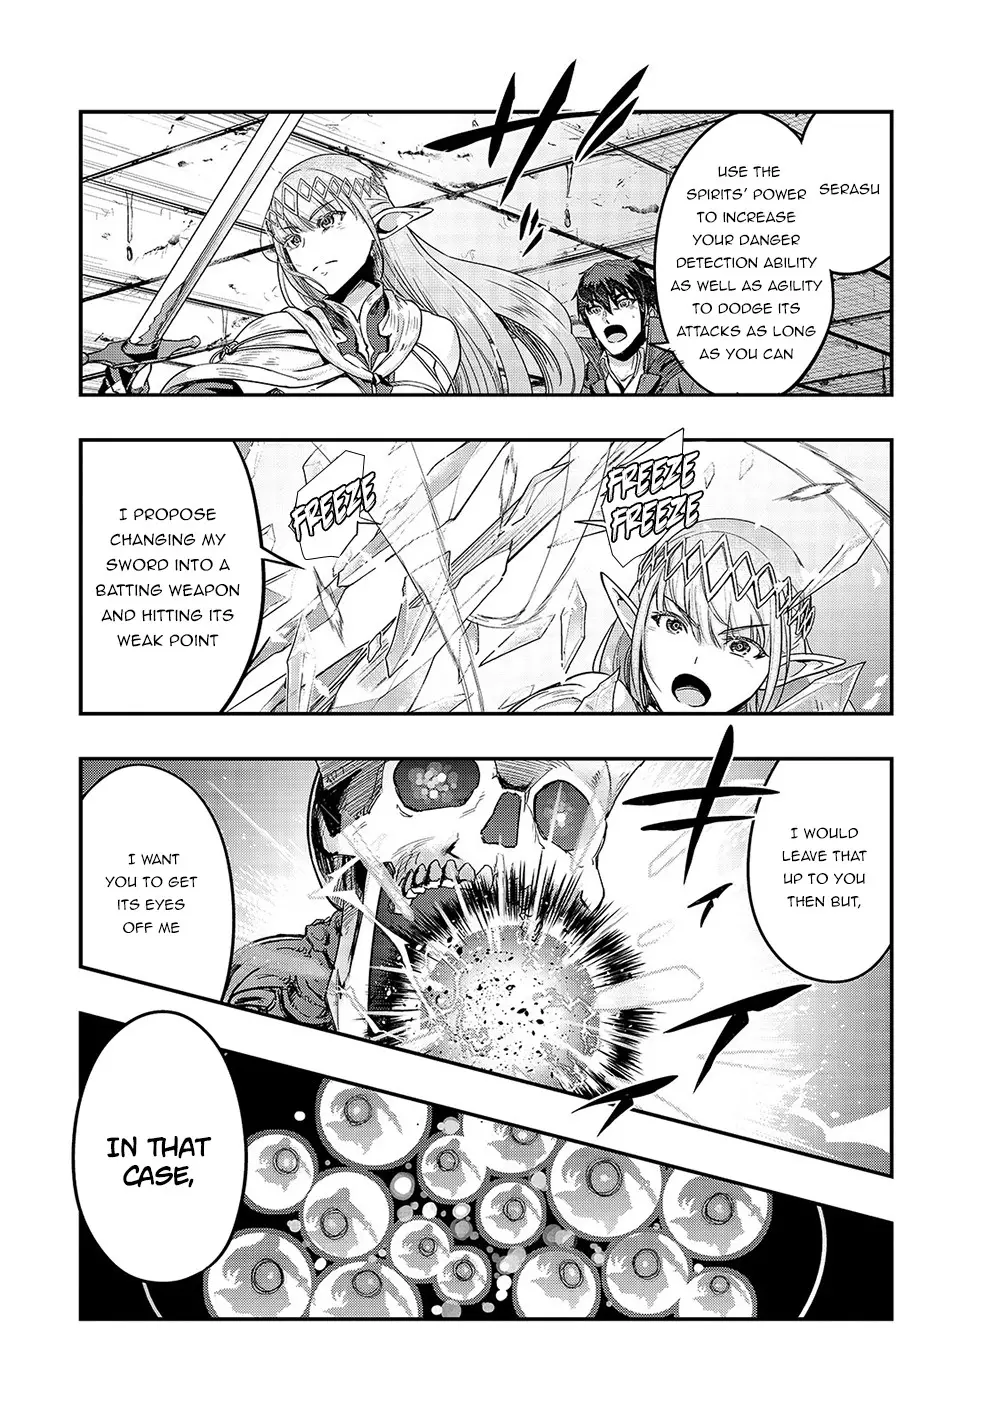 I Became The Strongest With The Failure Frame "abnormal State Skill" As I Devastated Everything - 13 page 16